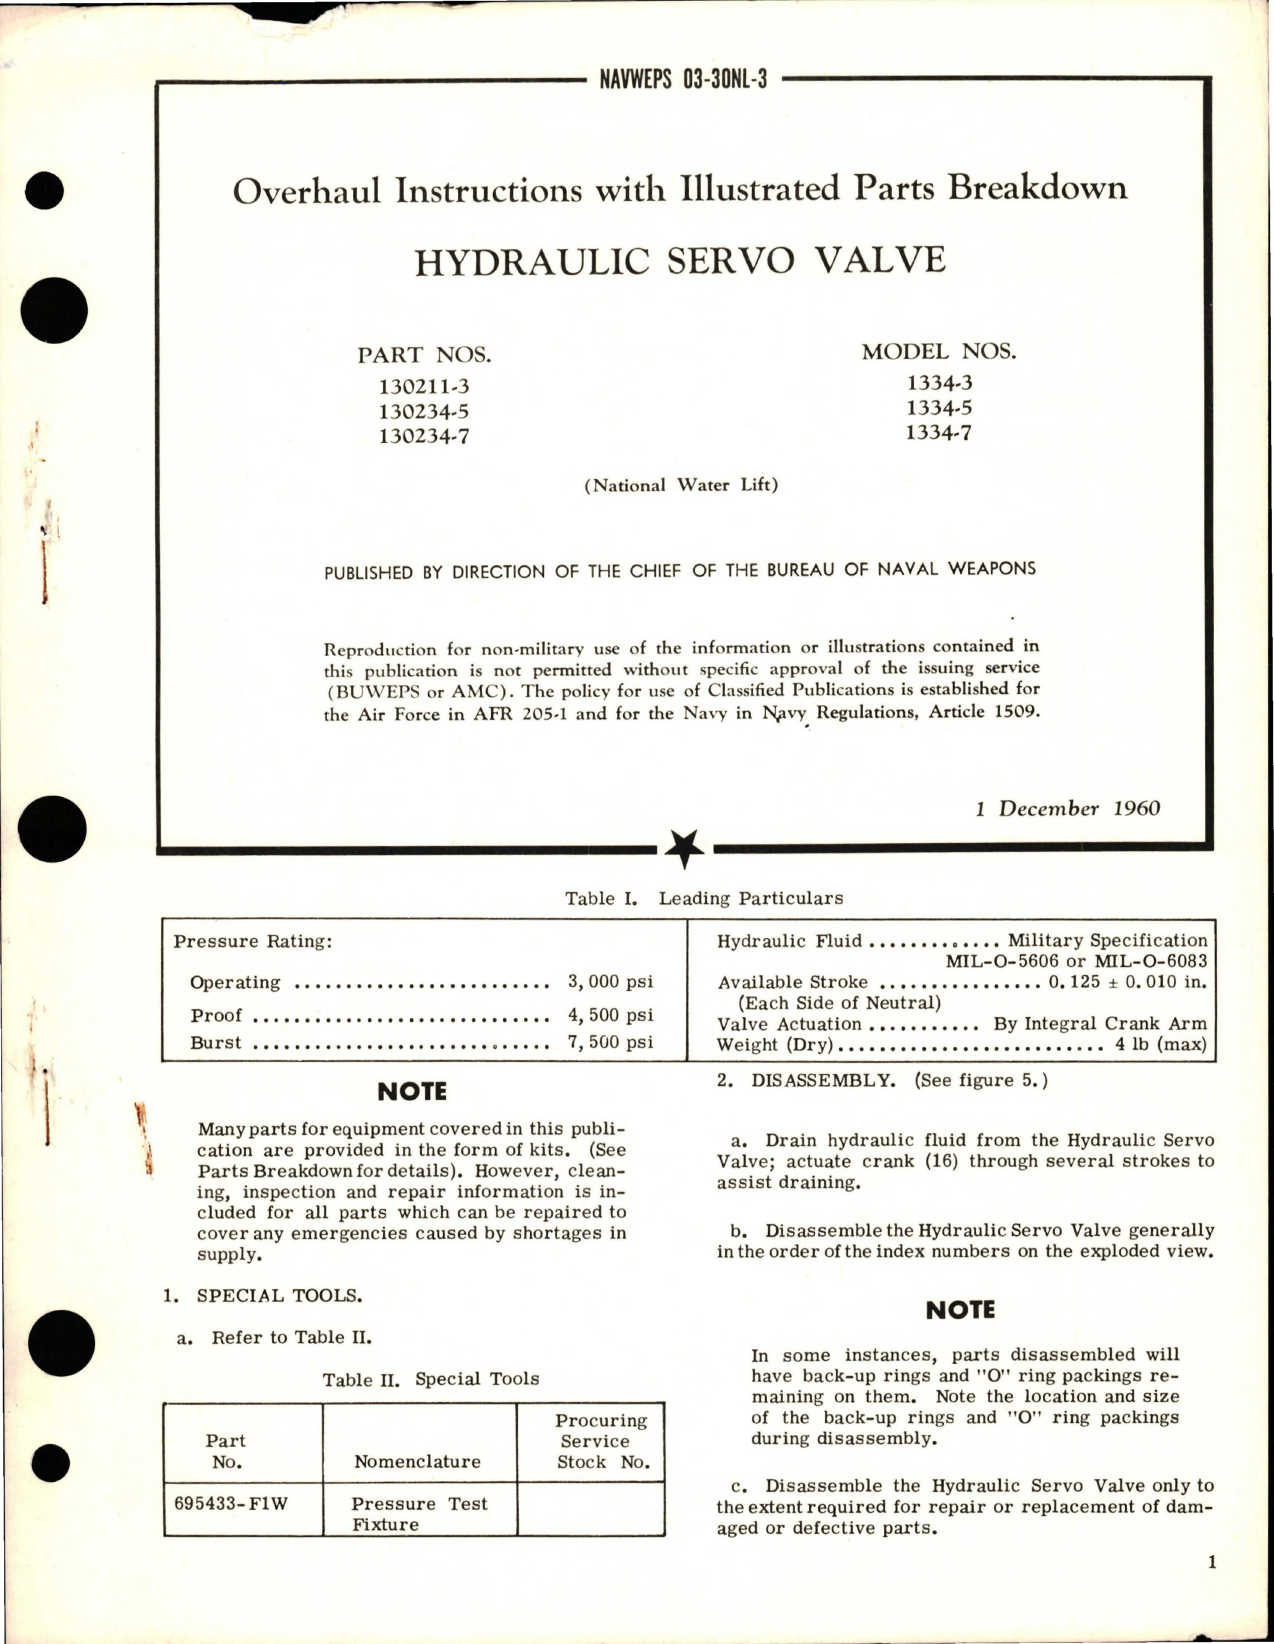 Sample page 1 from AirCorps Library document: Overhaul Instructions with Illustrated Parts for Hydraulic Servo Valve - Parts 130211-3, 130234-5, and 130234-7